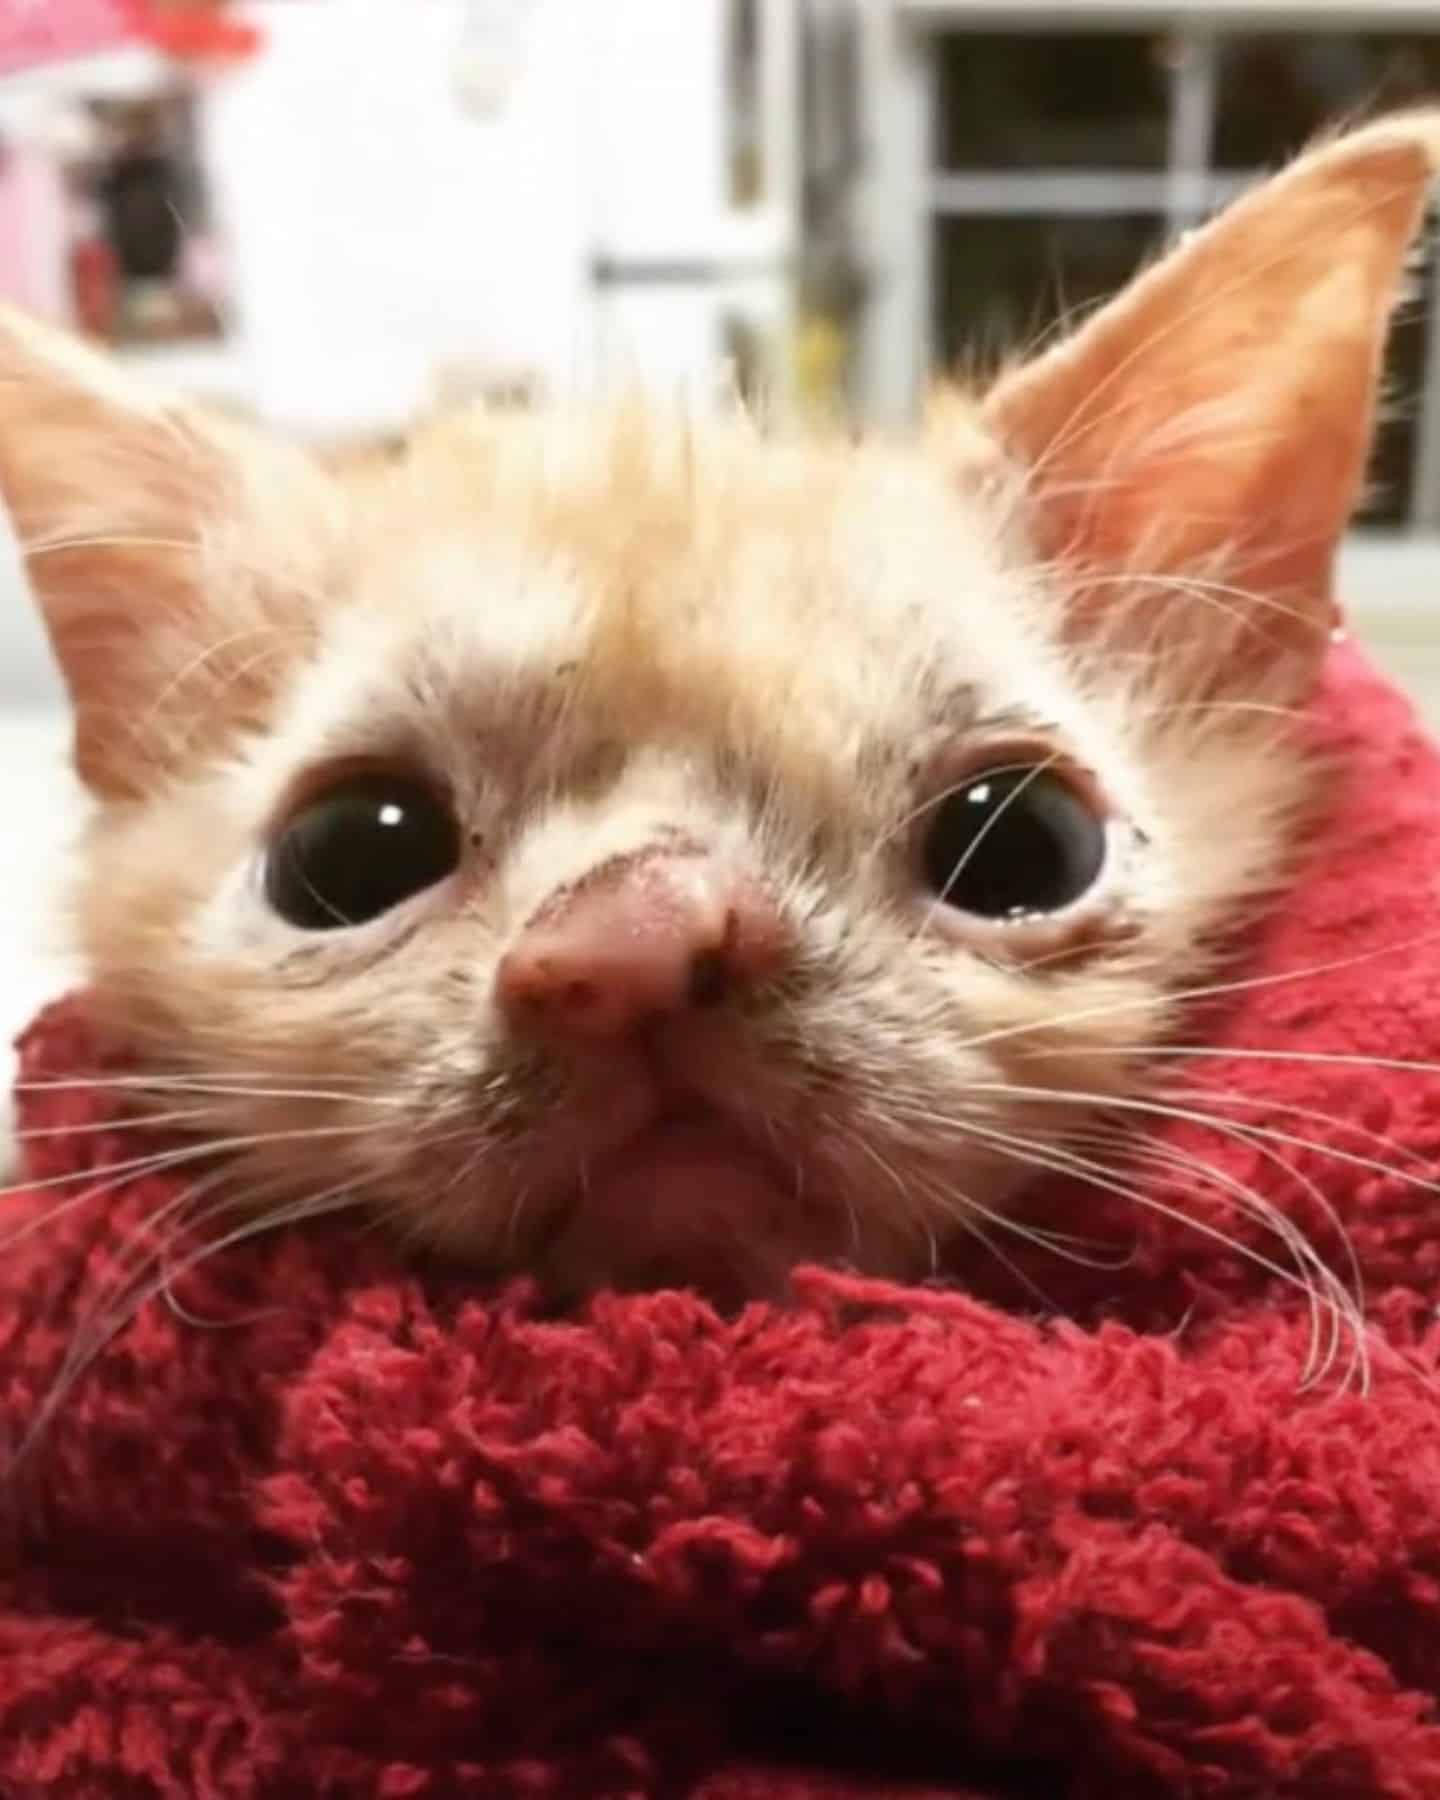 kitten wrapped in a red towel